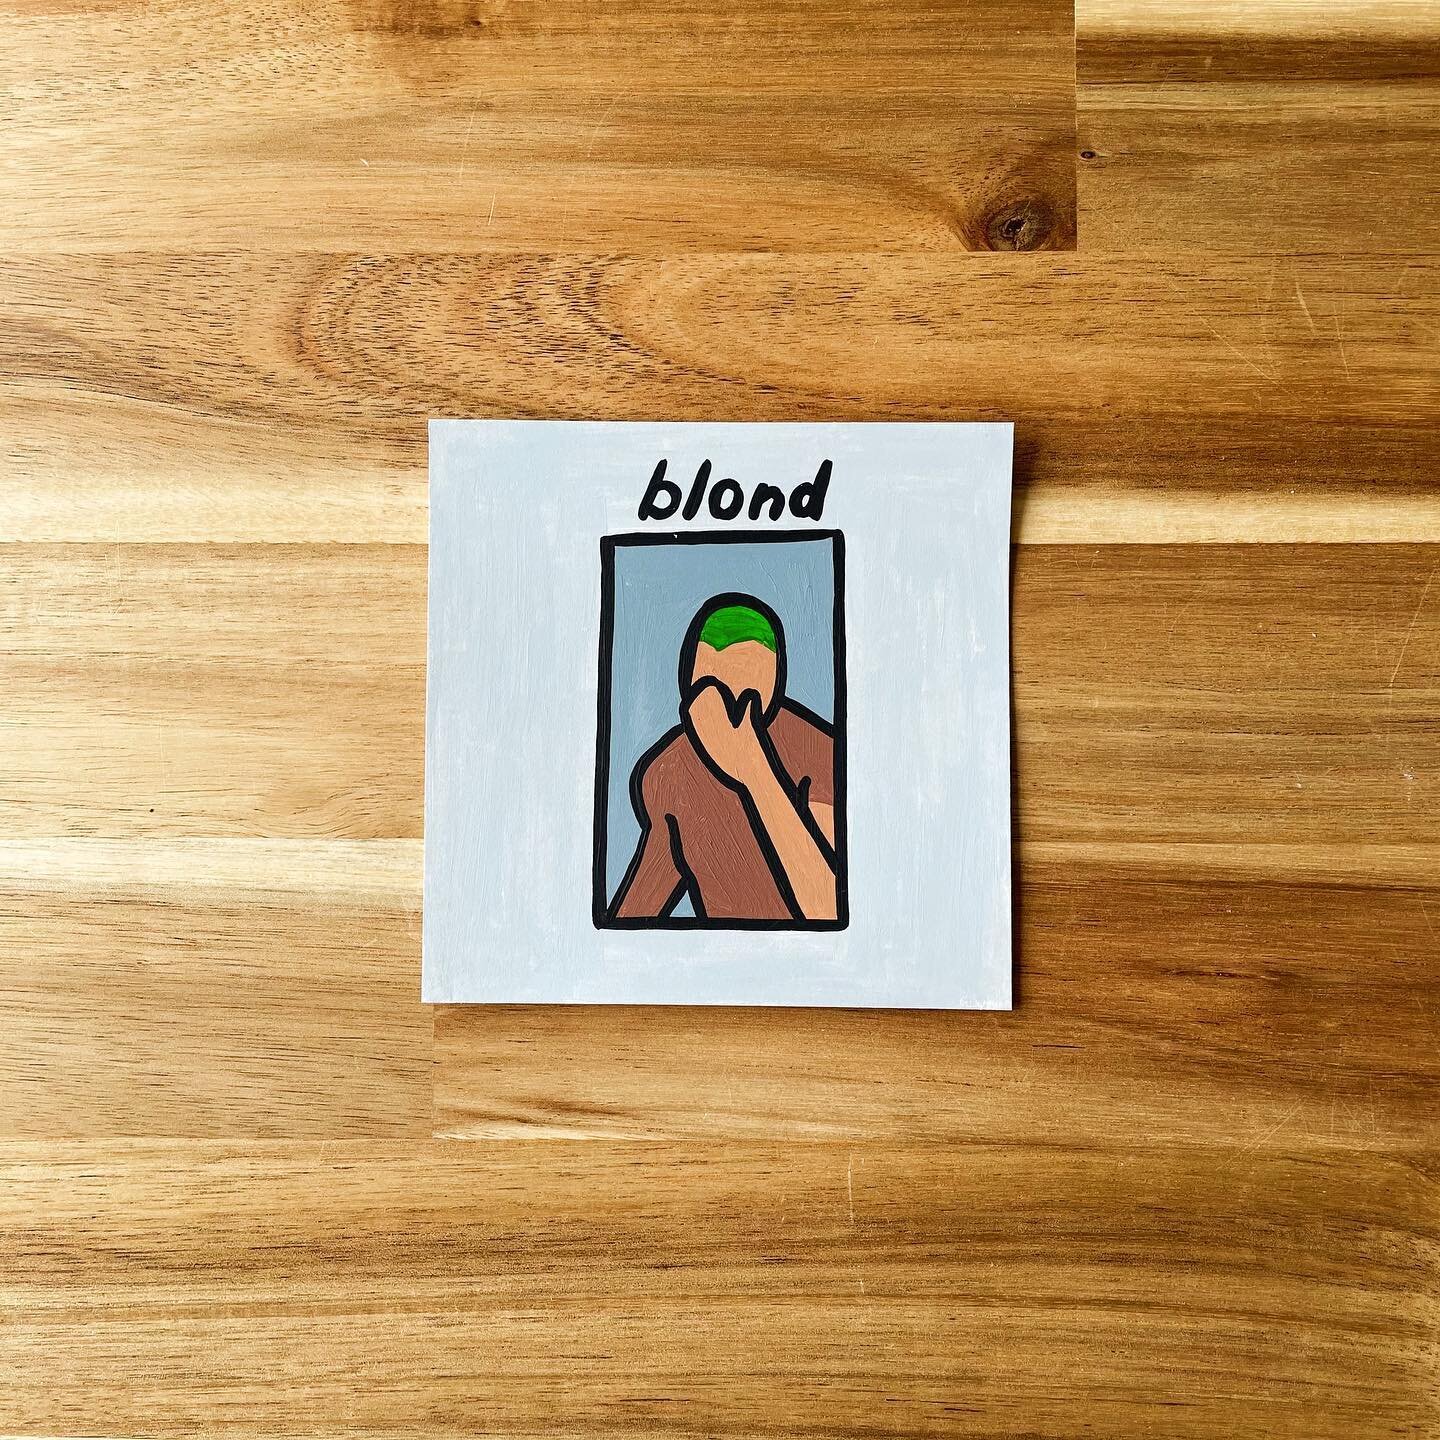 (89/100) Album &ldquo;Blonde&rdquo; by @blonded🔥 Painted with acrylic on 4&rdquo; x 4&rdquo; paper for my #100albumswithlaura project 🌈

Fave song &ldquo;Pink + White&rdquo; is so smooth 🥰

Scroll to see the original 🤍 Comment below what album co